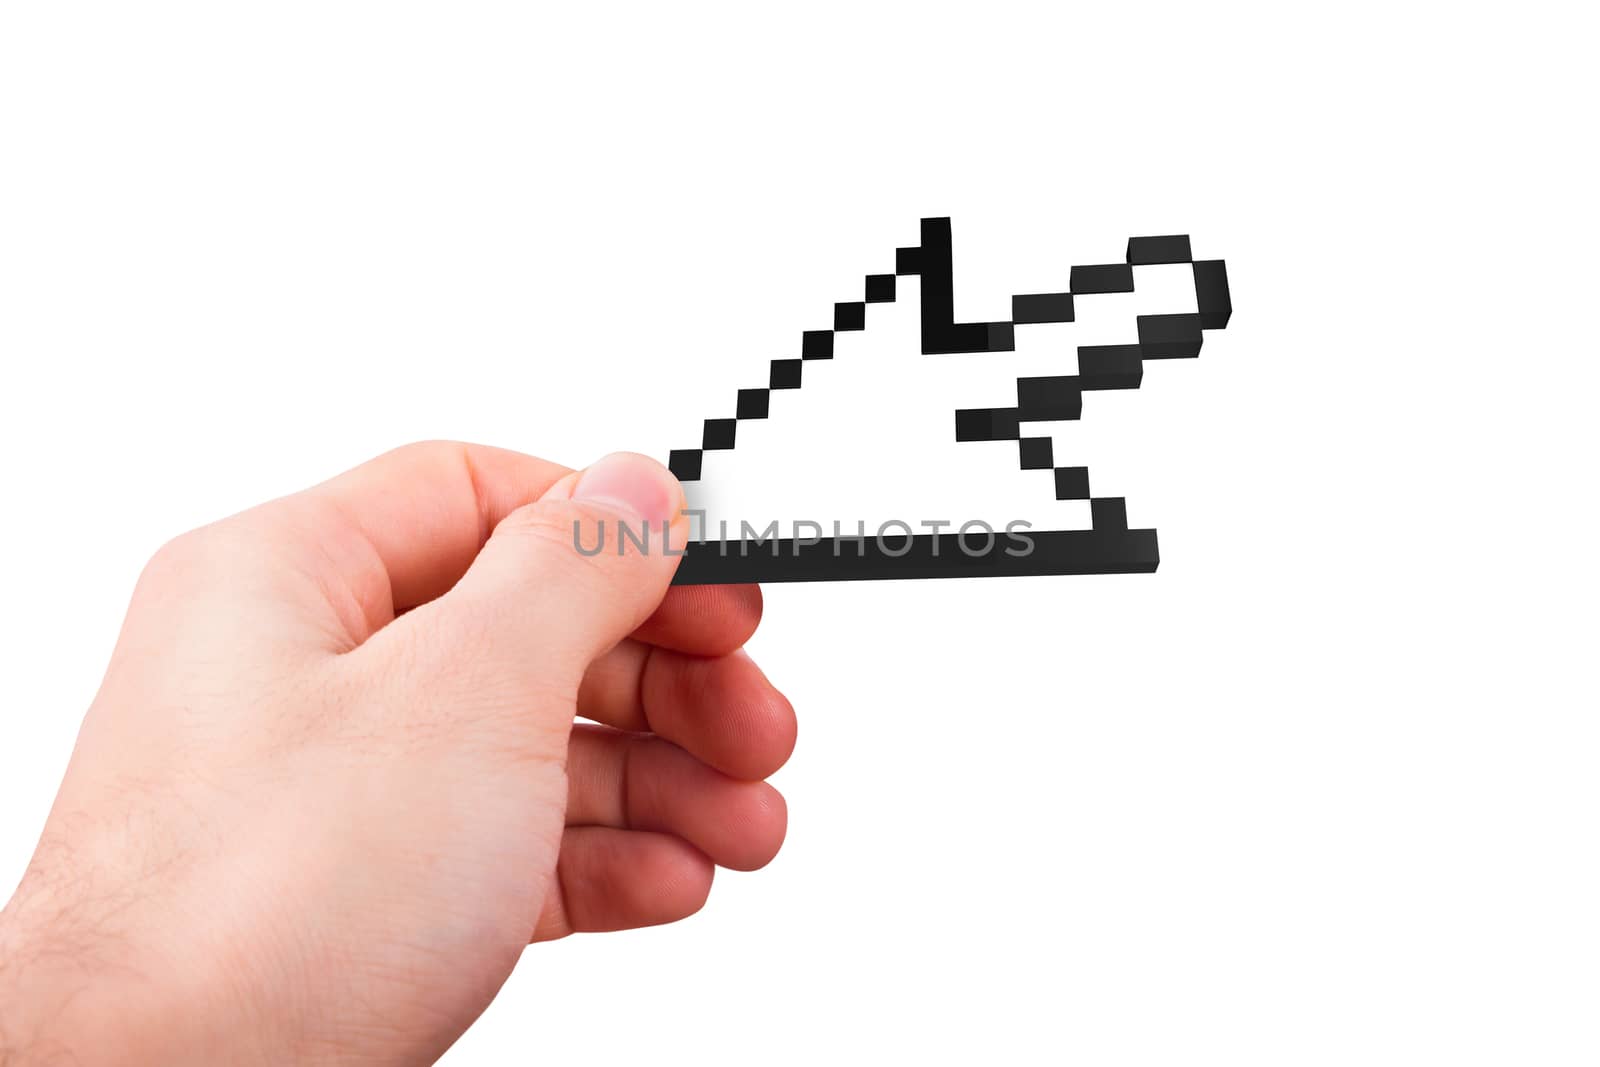 Hand holding computer mouse arrow cursor icon, isolated on white background.